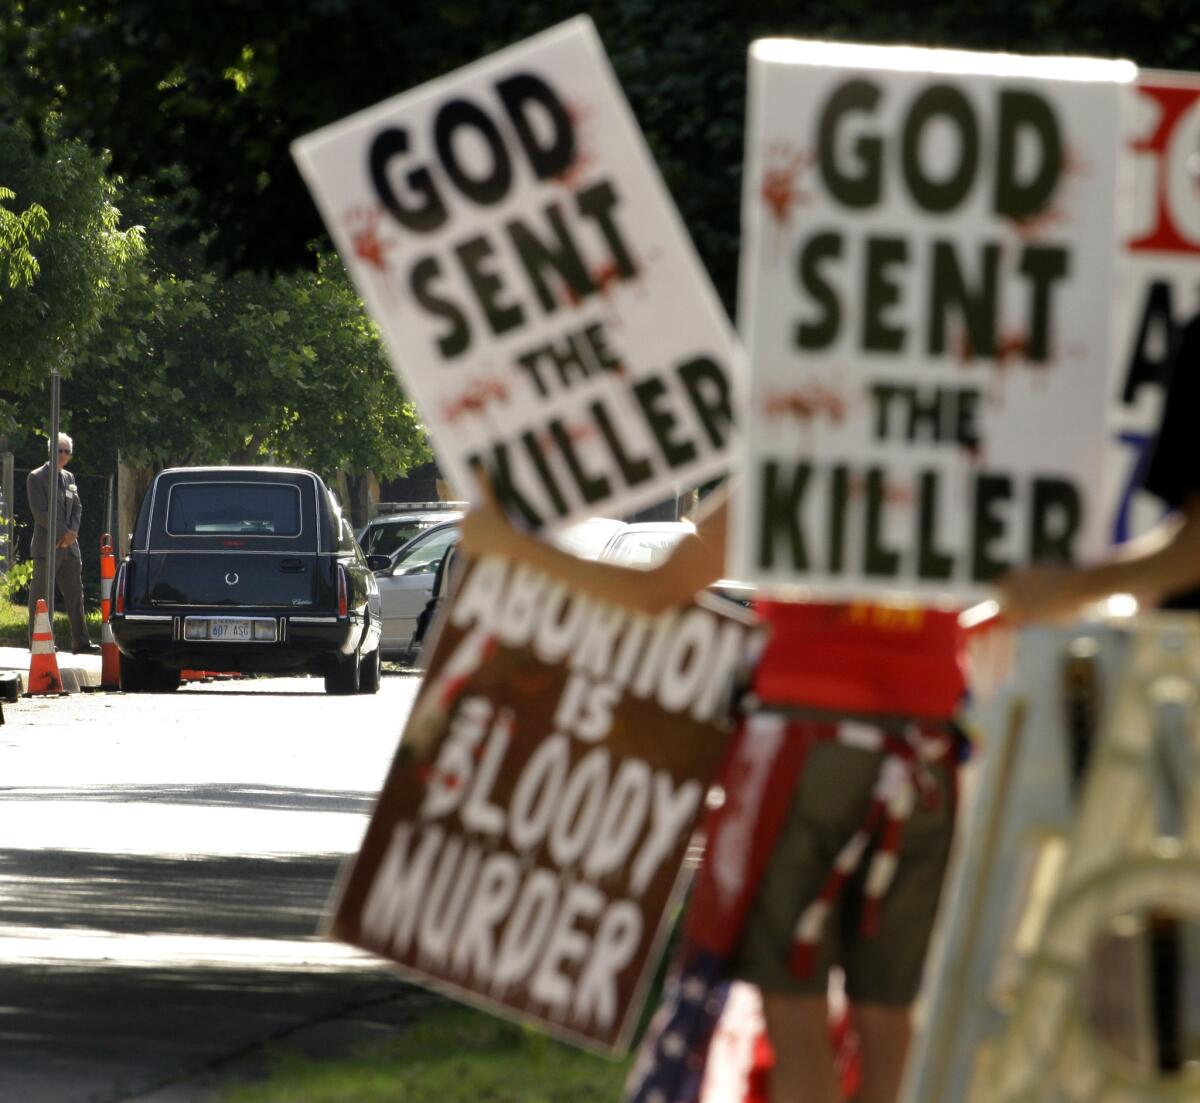 On June 6, 2009, protesters from Rev. Fred Phelps' Westboro Baptist Church demonstrated during funeral services for Dr. George Tiller at College Hill United Methodist Church in Wichita, Kan.